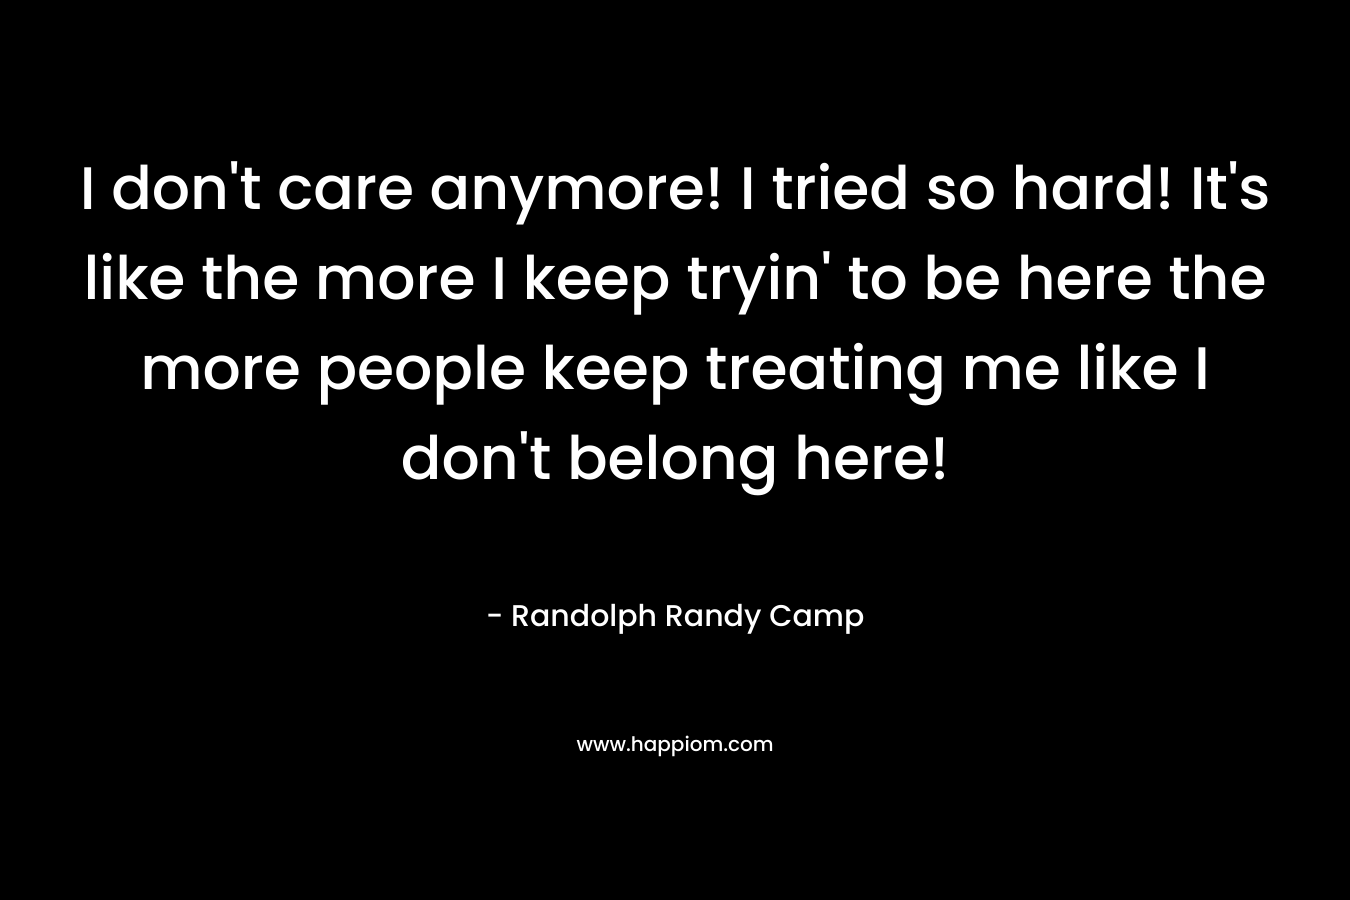 I don’t care anymore! I tried so hard! It’s like the more I keep tryin’ to be here the more people keep treating me like I don’t belong here! – Randolph Randy Camp